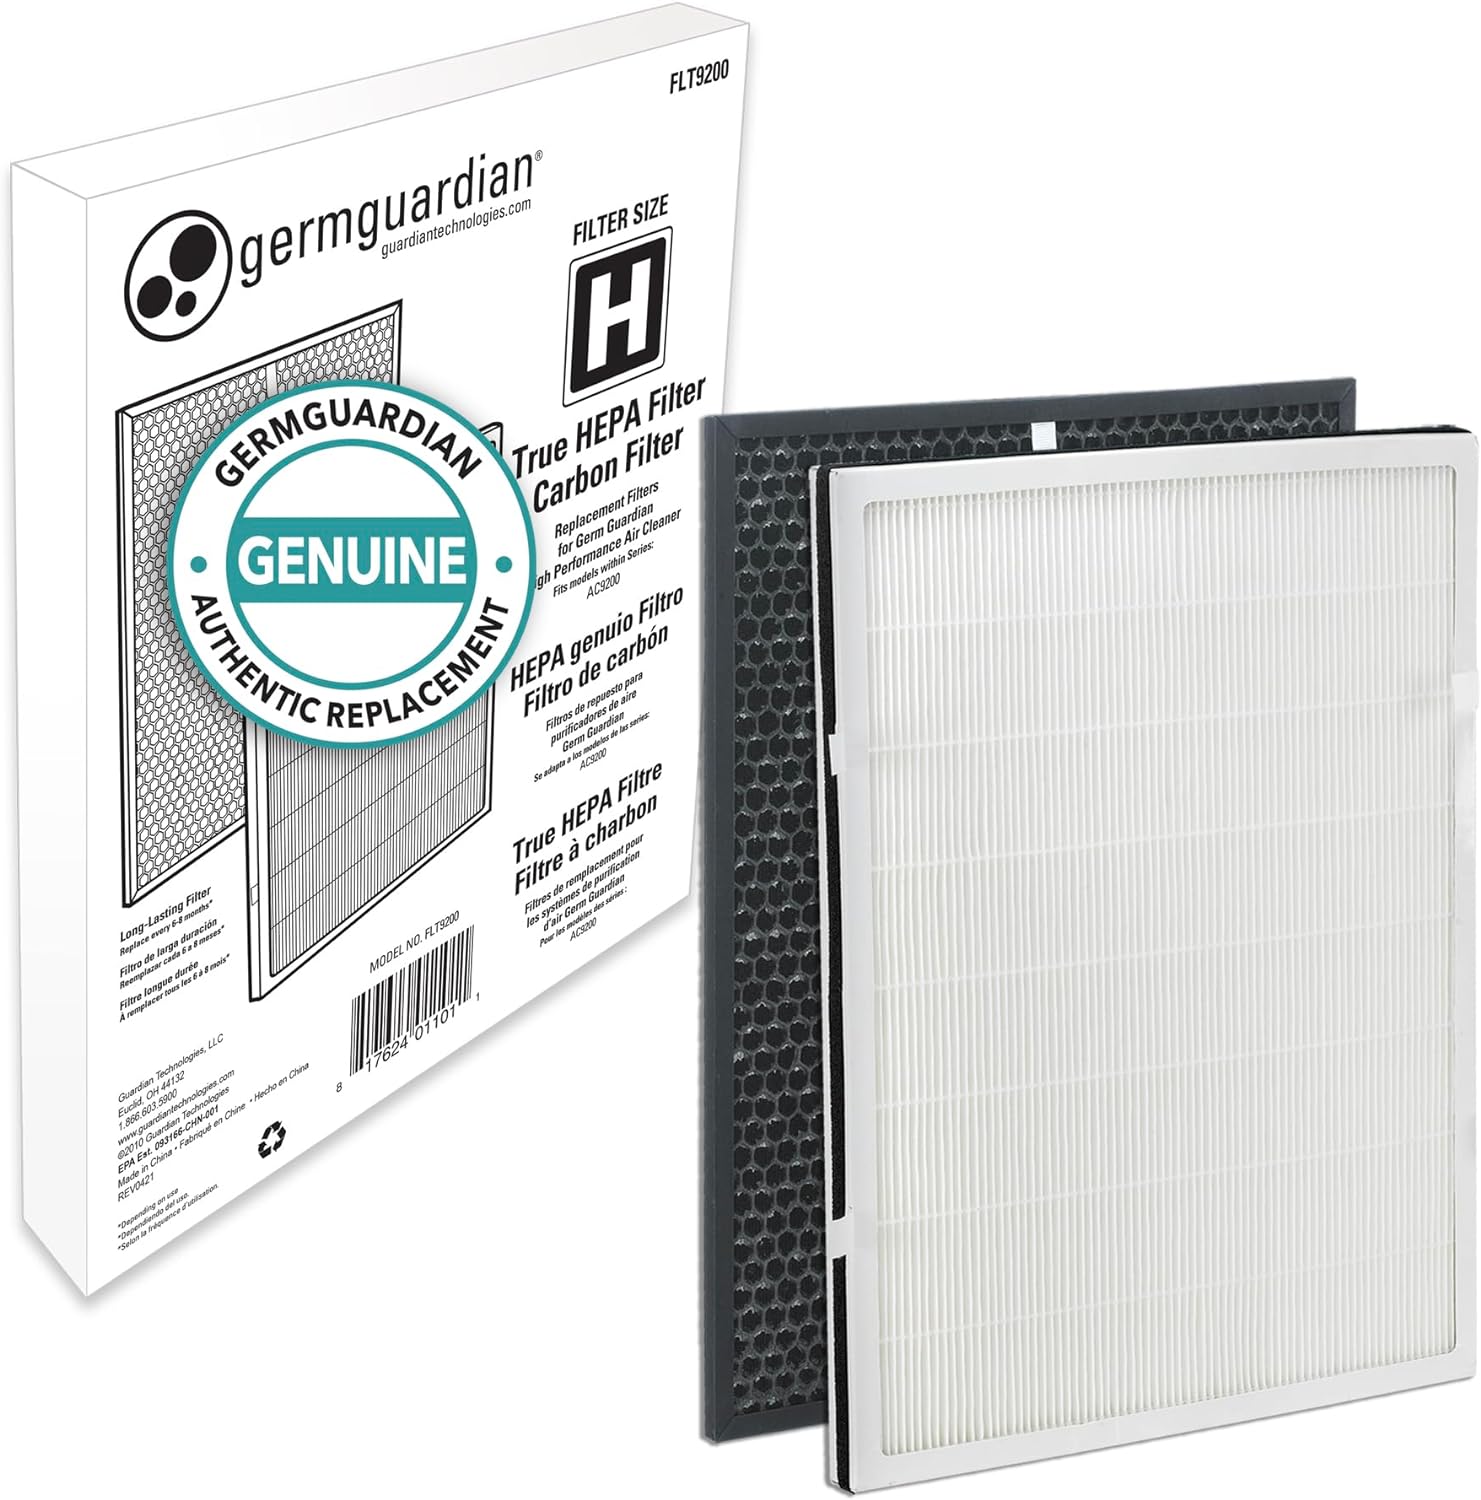 GermGuardian Filter H HEPA Pure Genuine Air Purifier Replacement Filter, Removes 99.97% of Pollutants GermGuardian Air Purifier AC9200, FLT9200